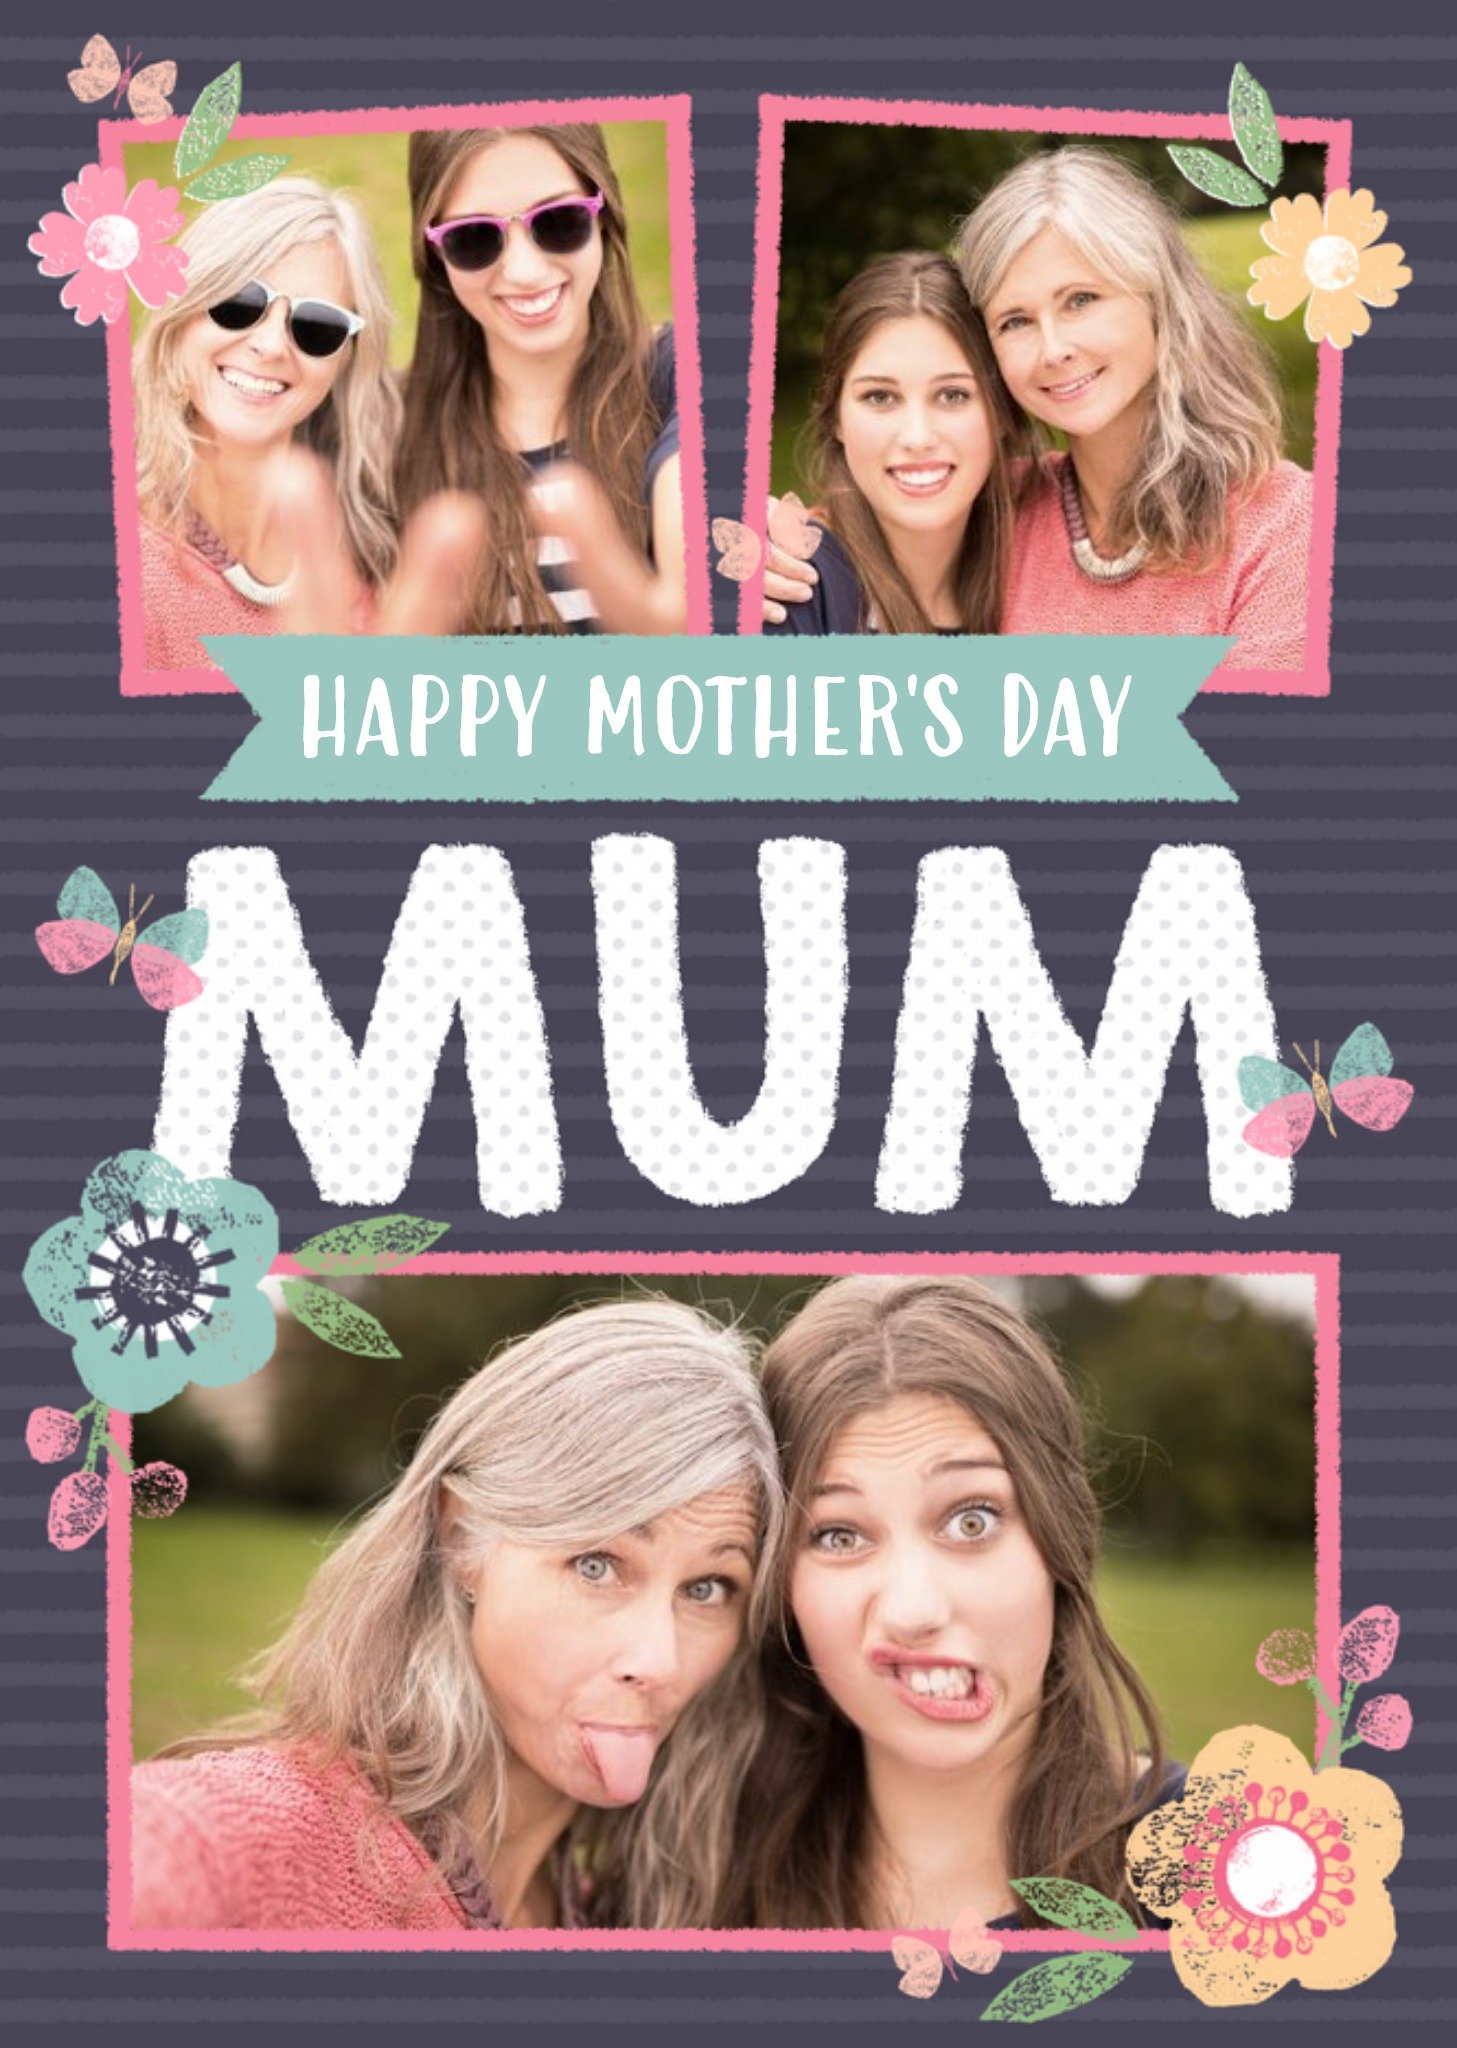 Moonpig Pastel Flowers Multi-Photo Personalised Mother's Day Card, Large